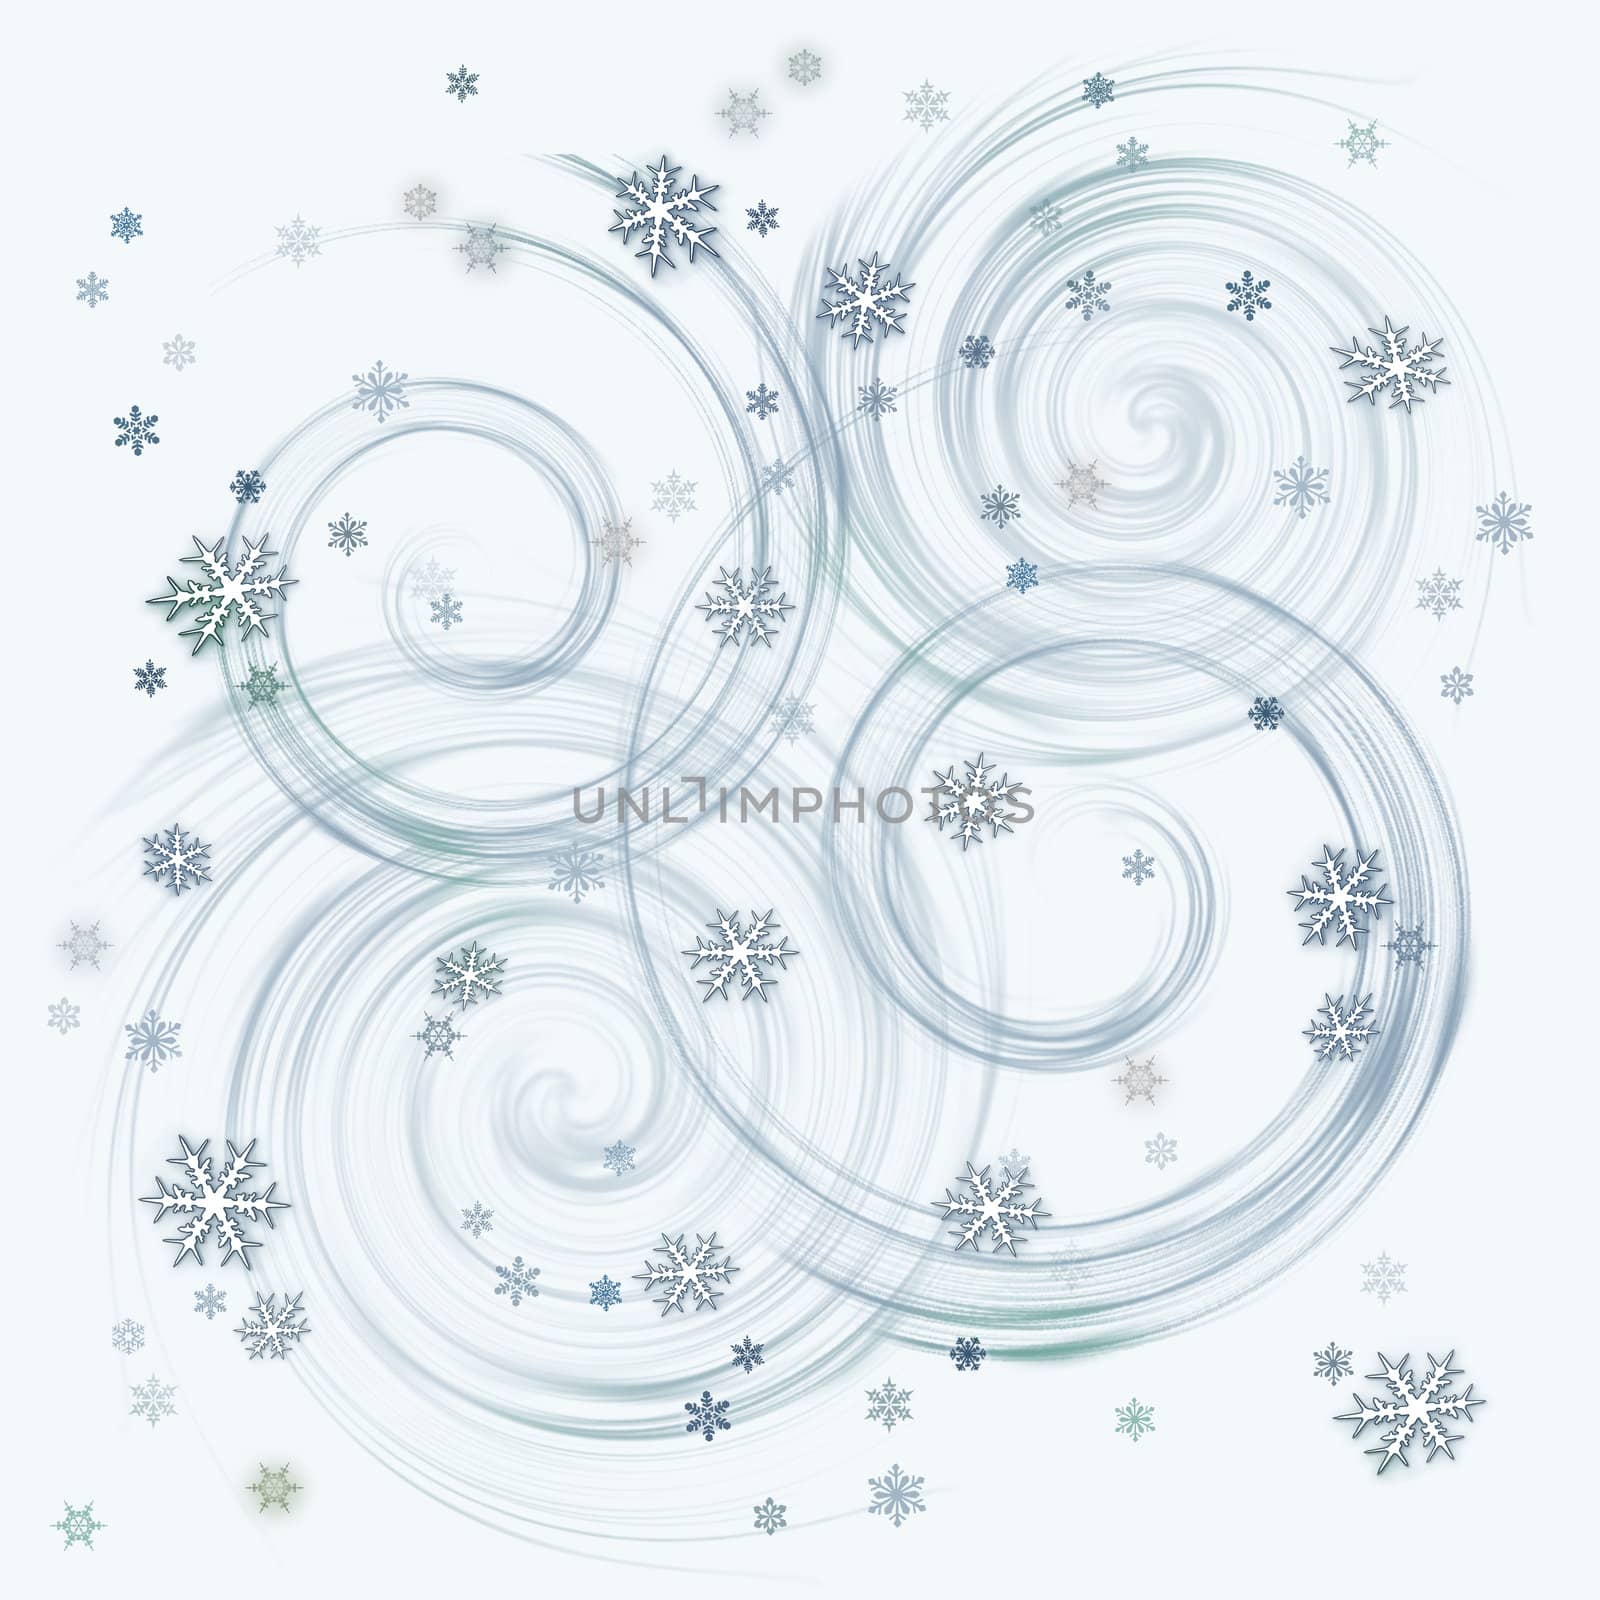 Abstract with white snow flakes against blue background